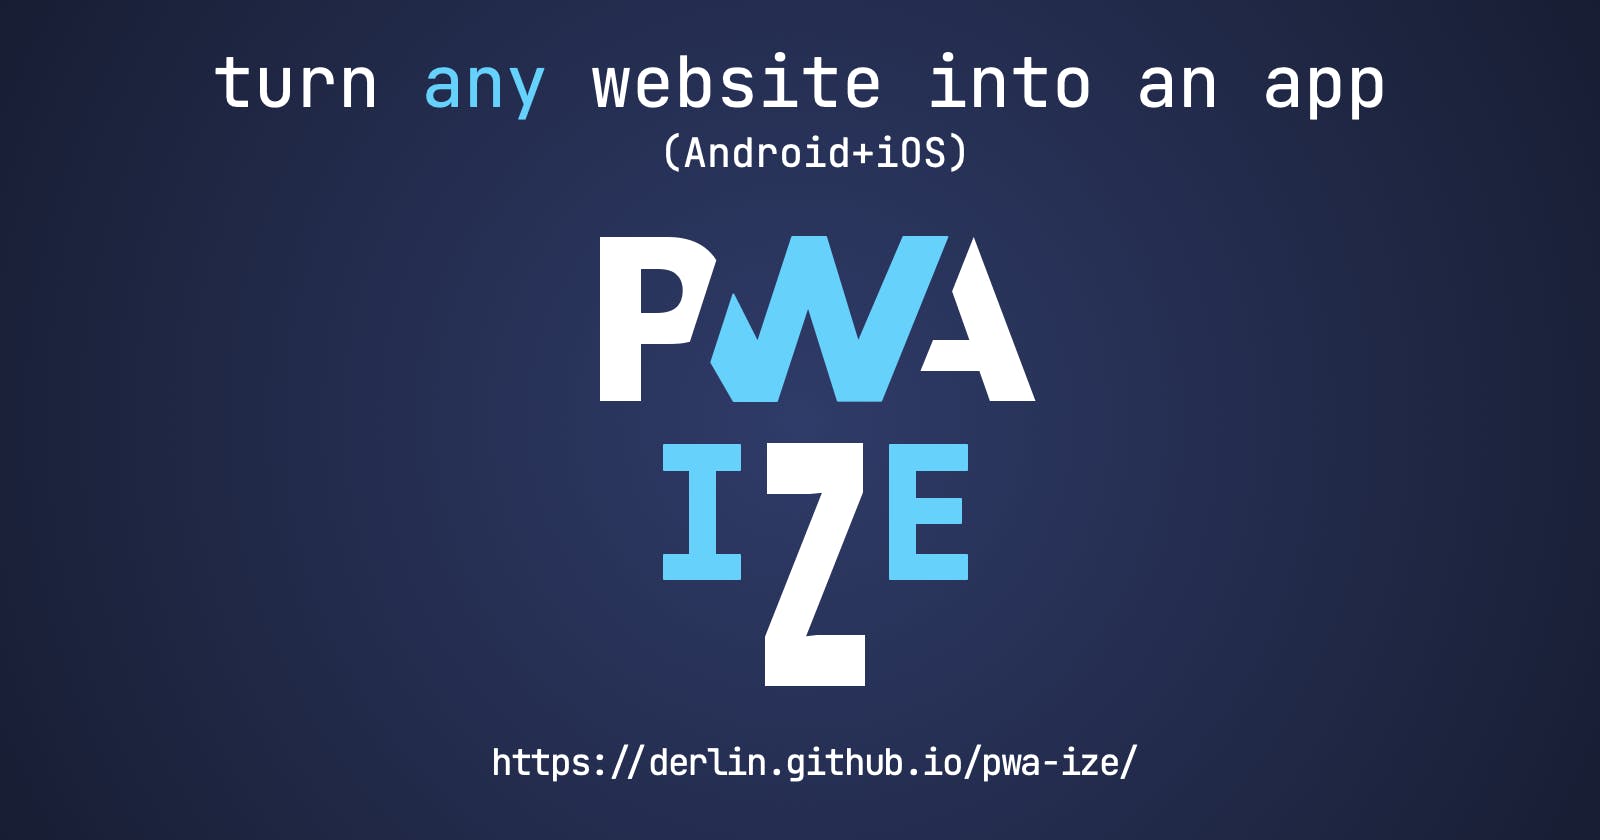 PWA-ize: open web pages in their own window on mobile